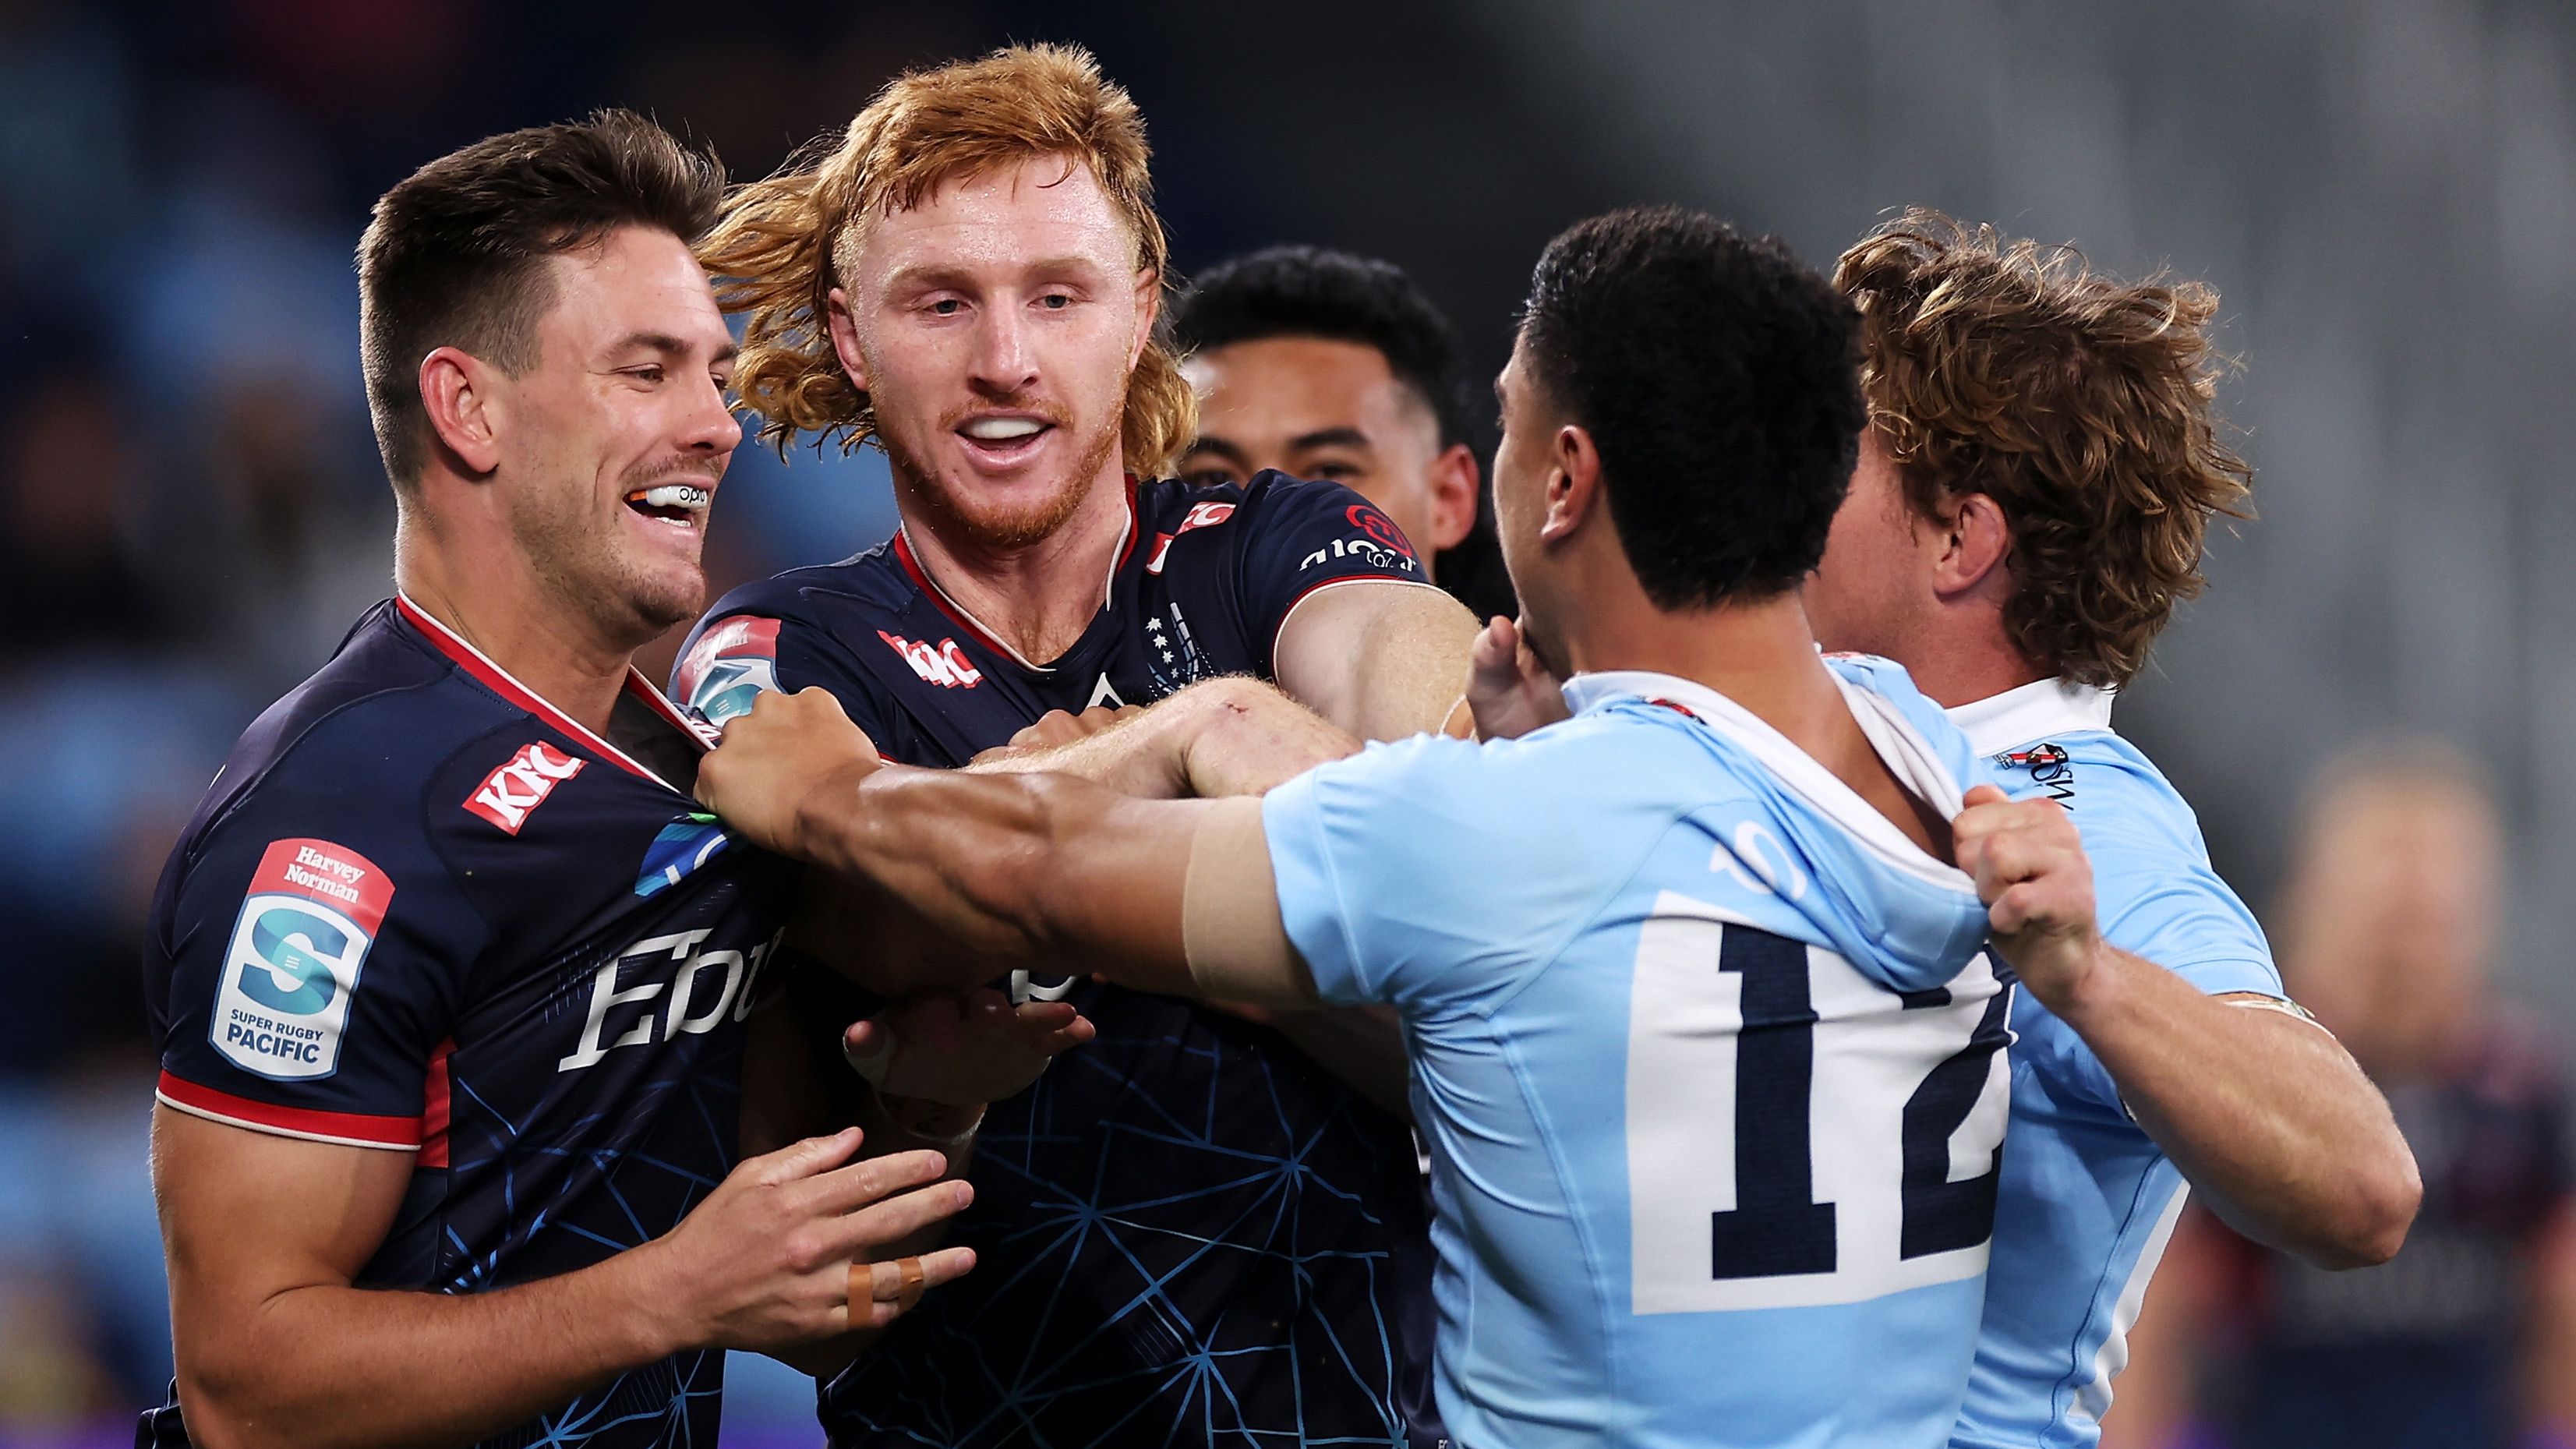 Melbourne Rebels left to rue lack of discipline after pair of penalty tries help Waratahs seal comeback